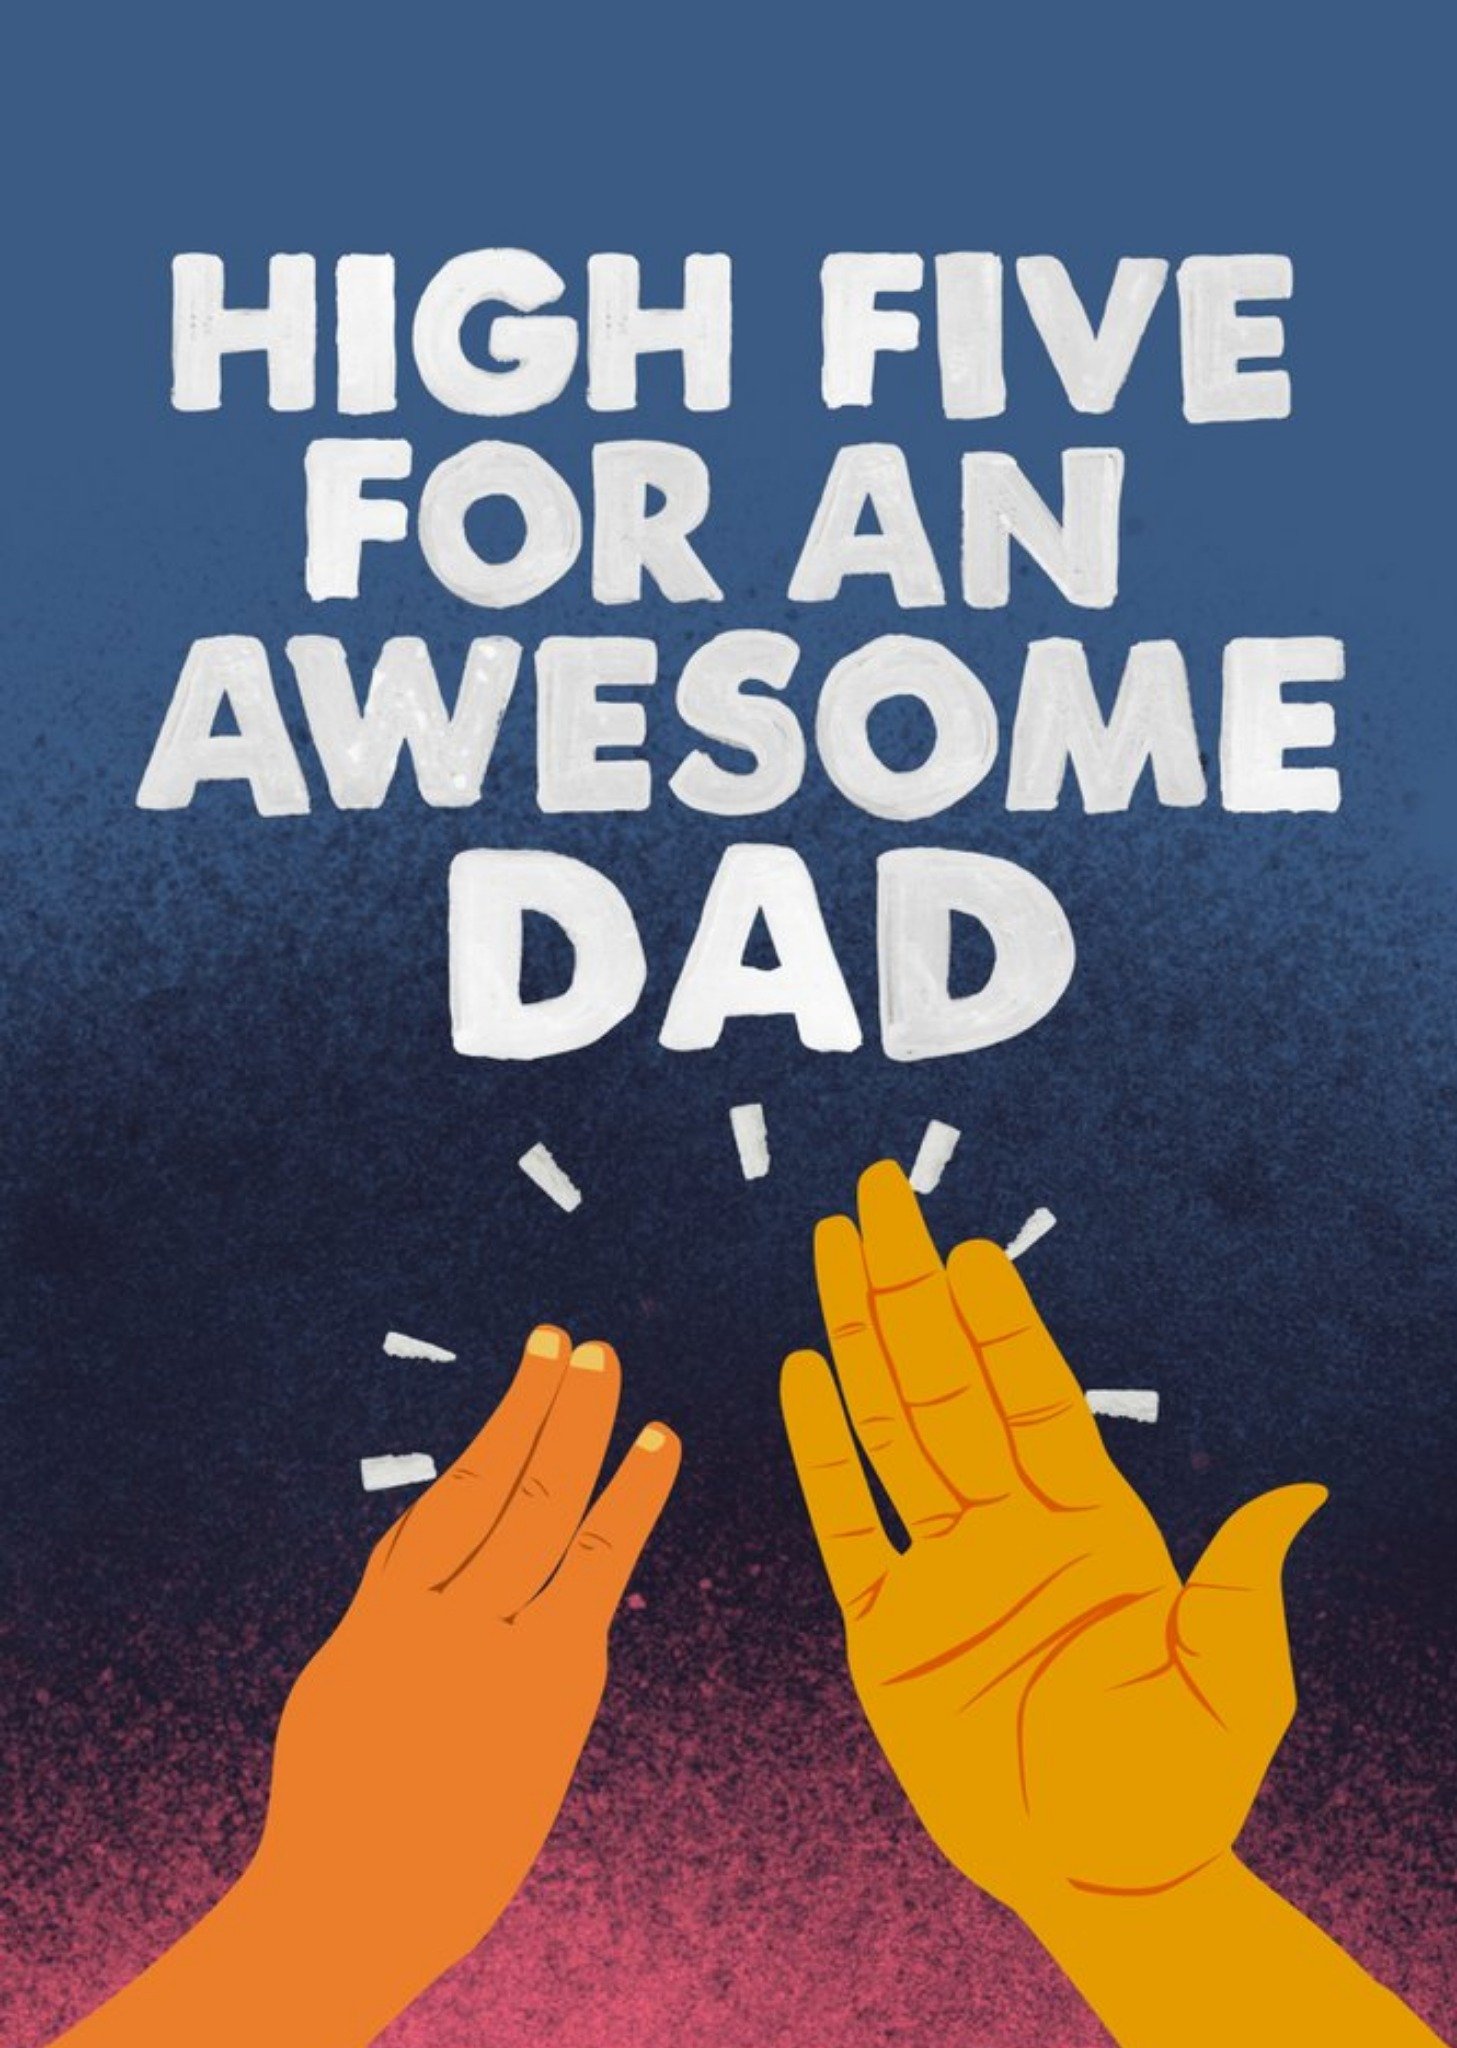 Jolly Awesome Dad High Five Card Ecard